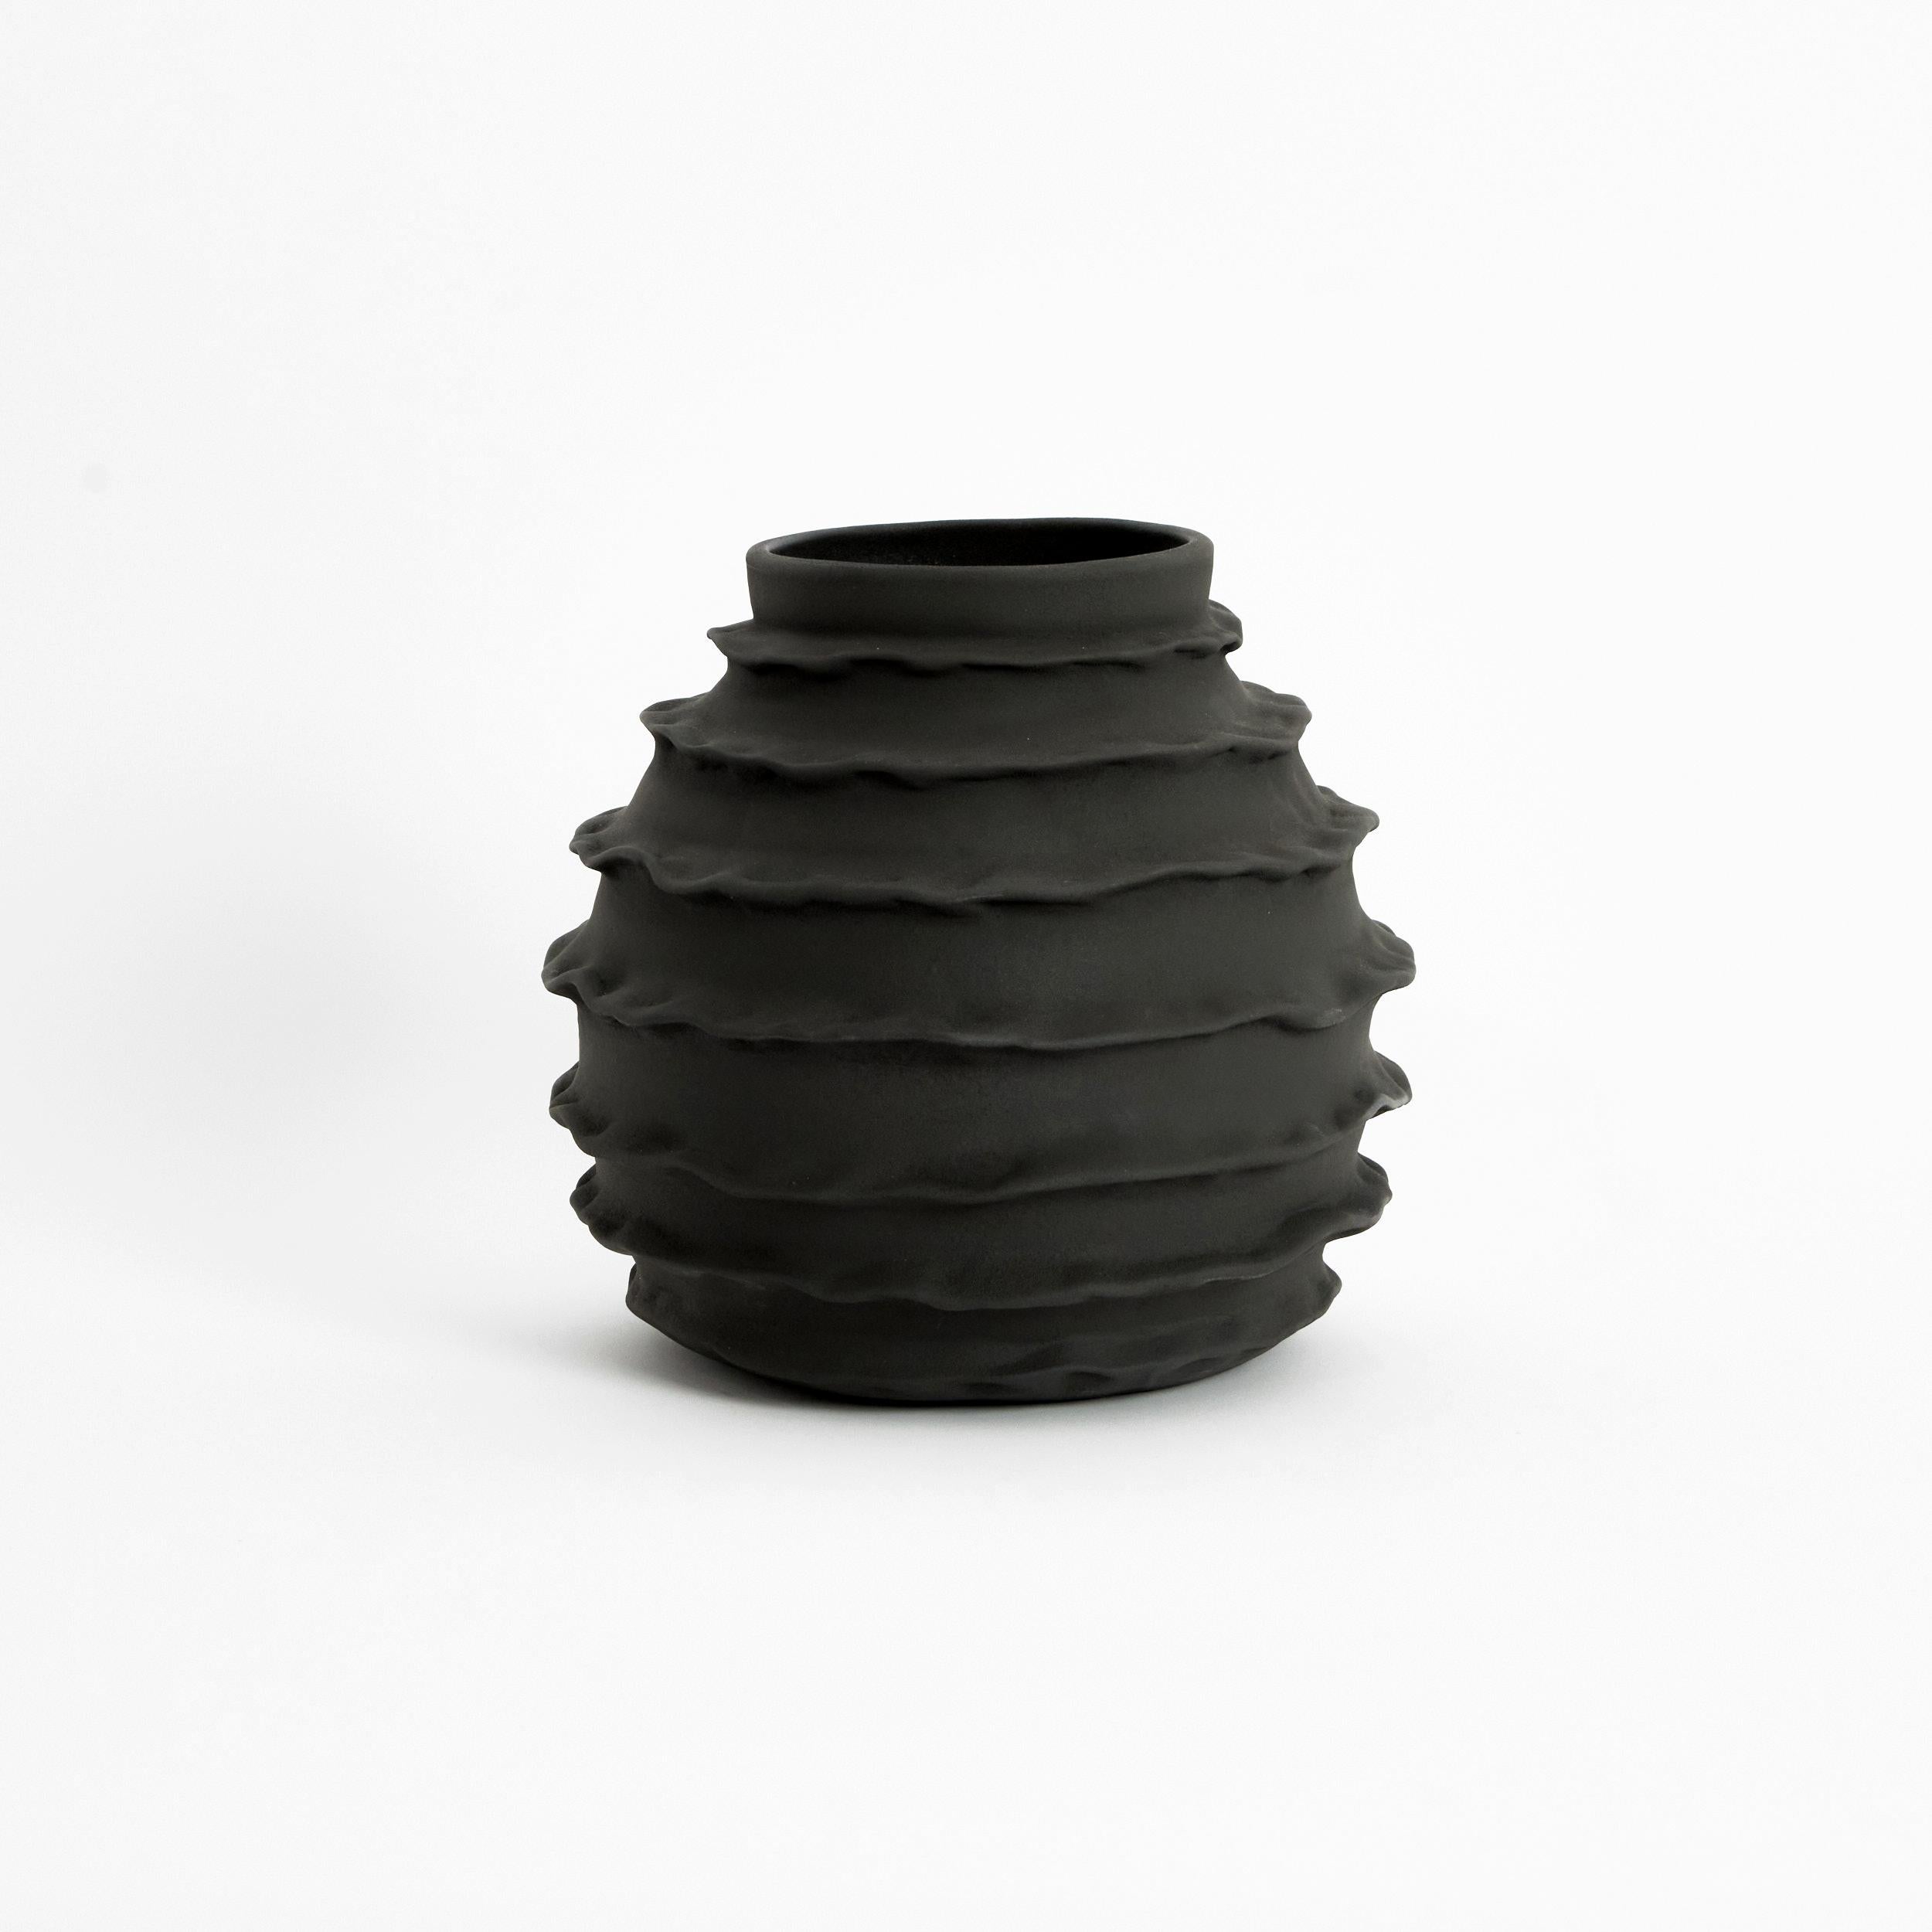 Holiday vase in dusty black.

Designed by Project 213A in 2021 Handmade Stoneware.

The oval vase, ruffled on the edges brings about contrast of lightness. This hand made and embellished vase is finished with a contemporary shiny white glaze which